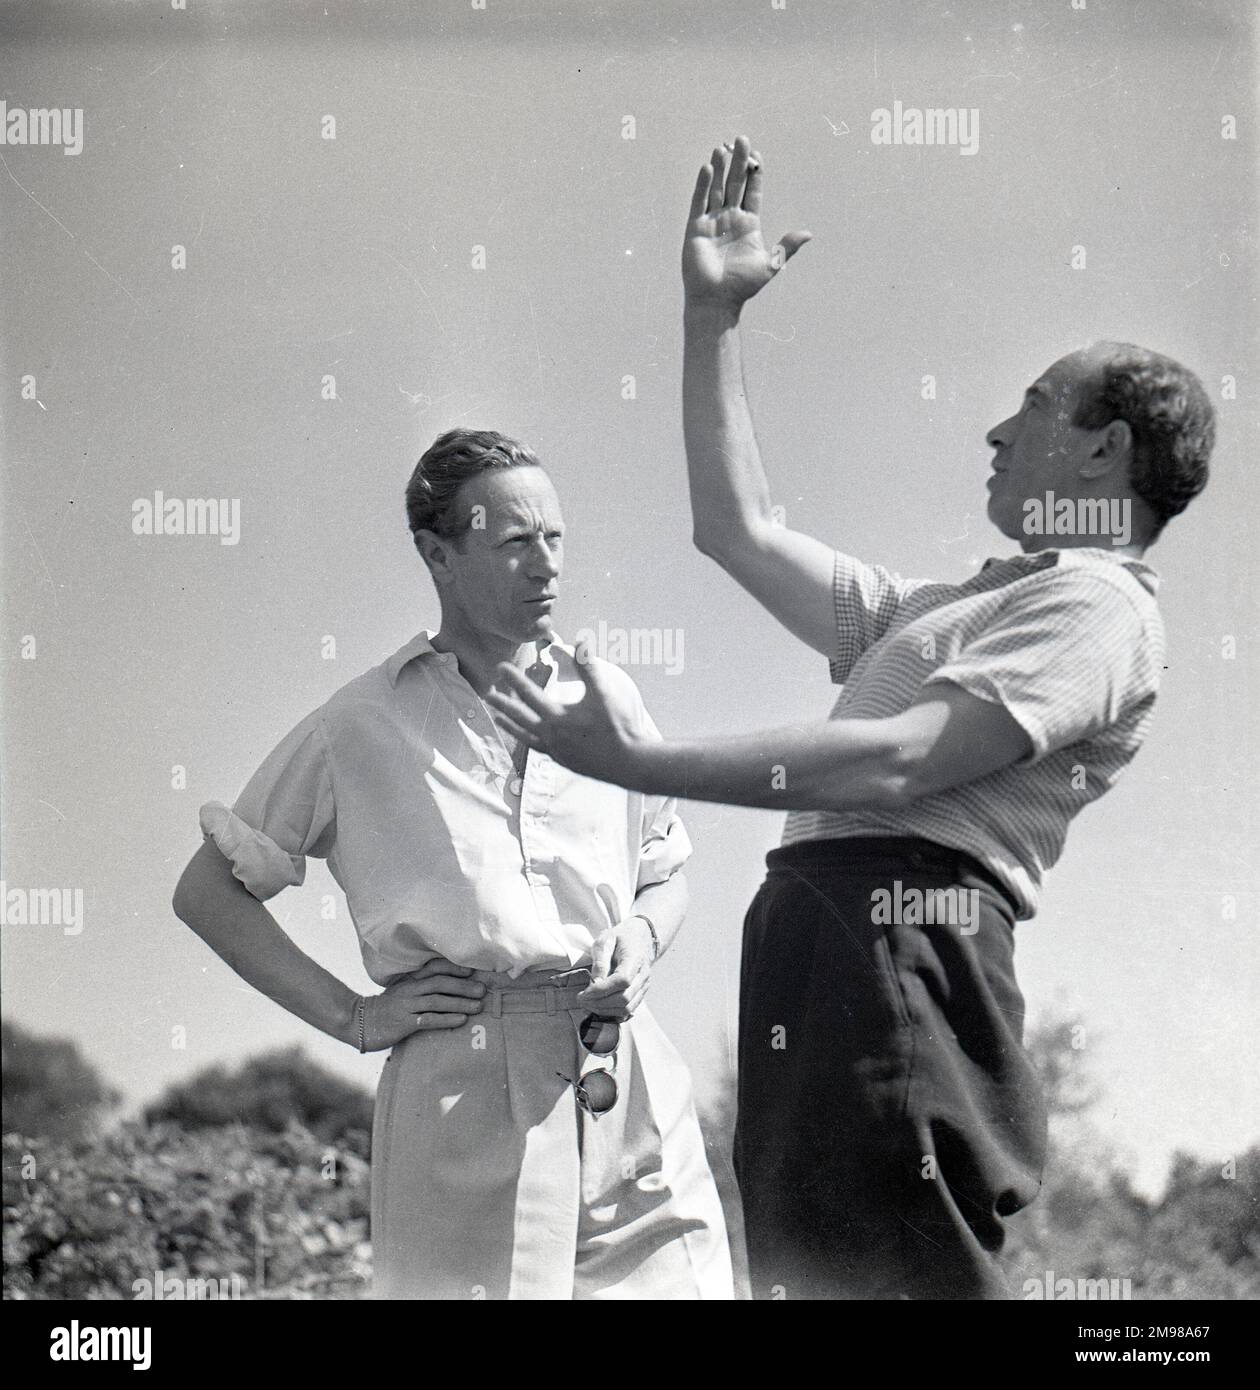 Leslie Howard (1893-1943), English actor, and Georges Perinal (1897-1965), French cinematographer, on location during the filming of The First of The Few, in which Howard played the Spitfire designer RJ Mitchell. Stock Photo